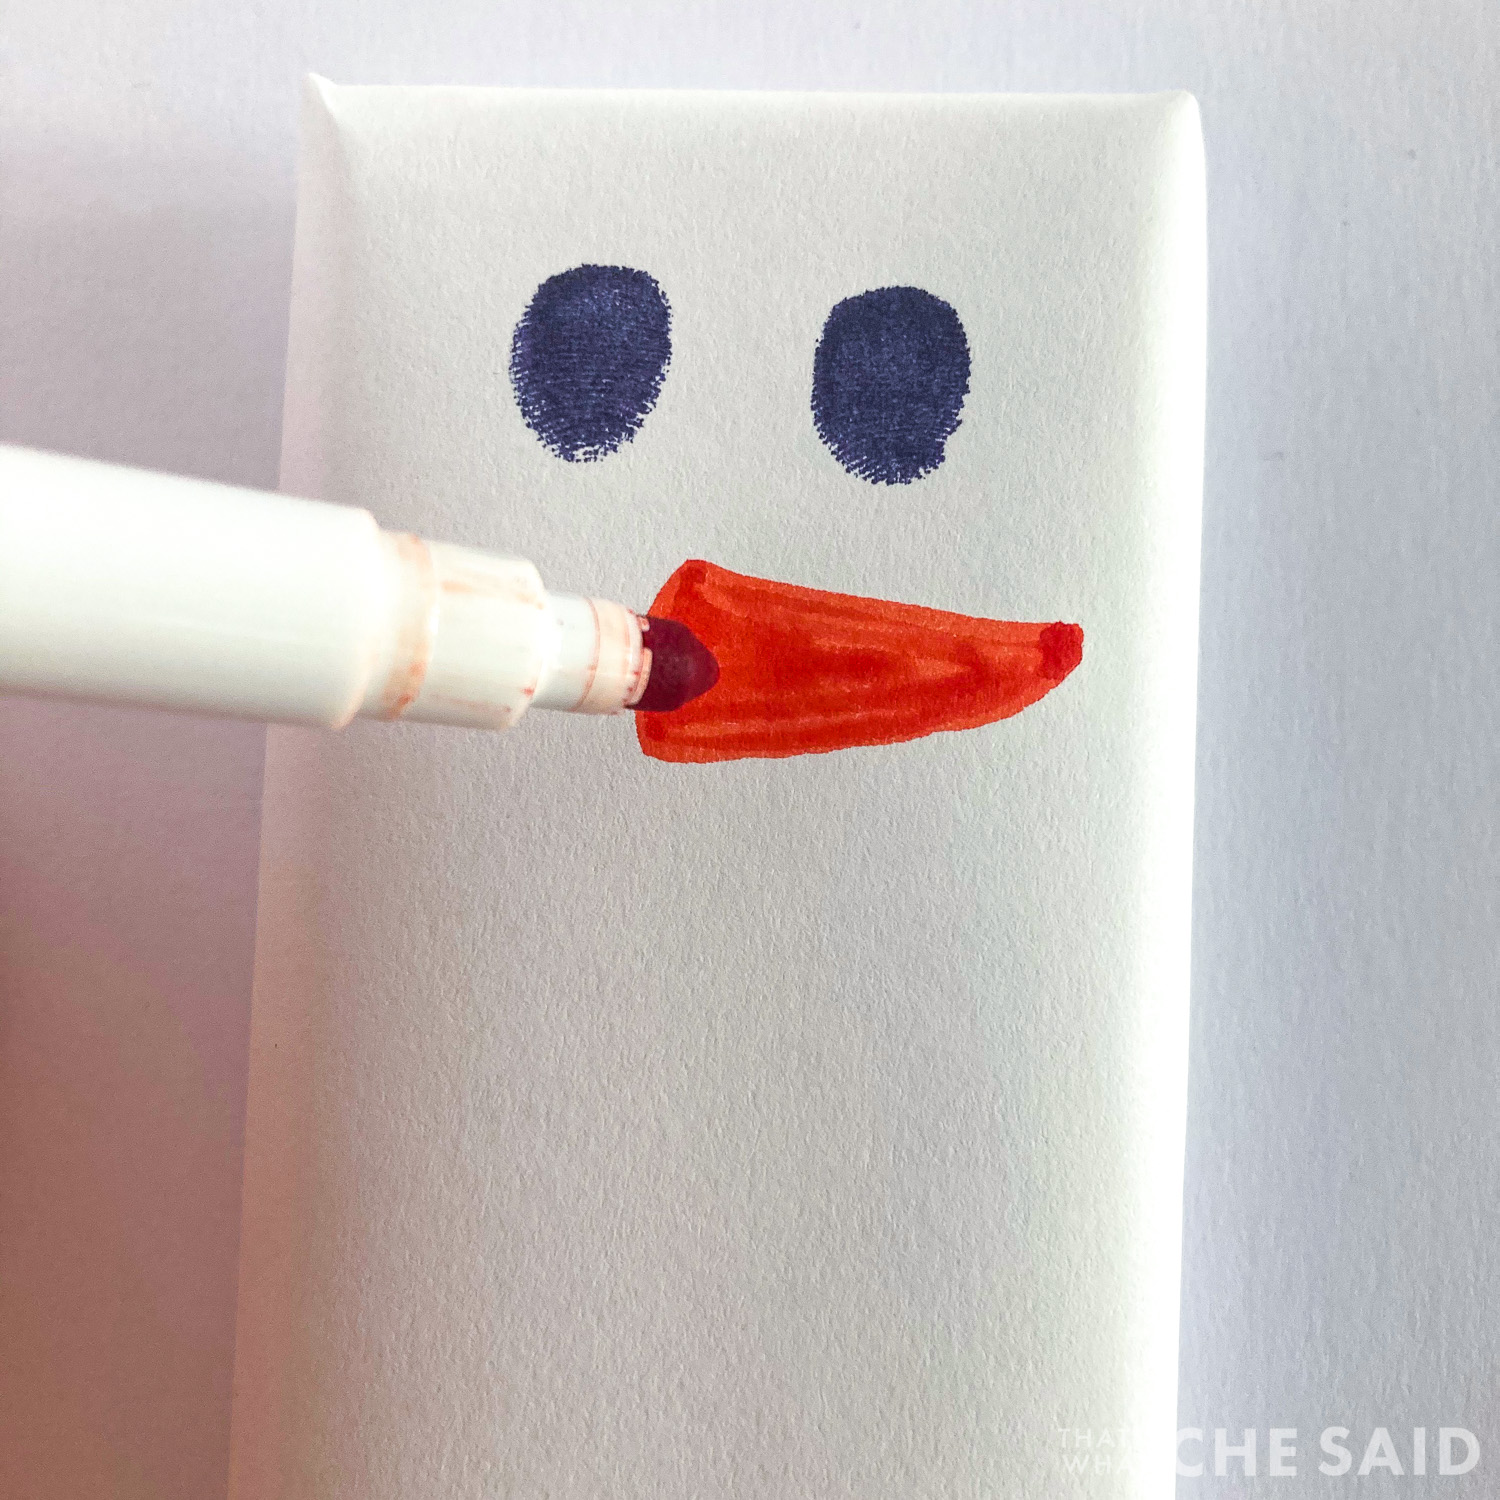 drawing the carrot nose with orange marker